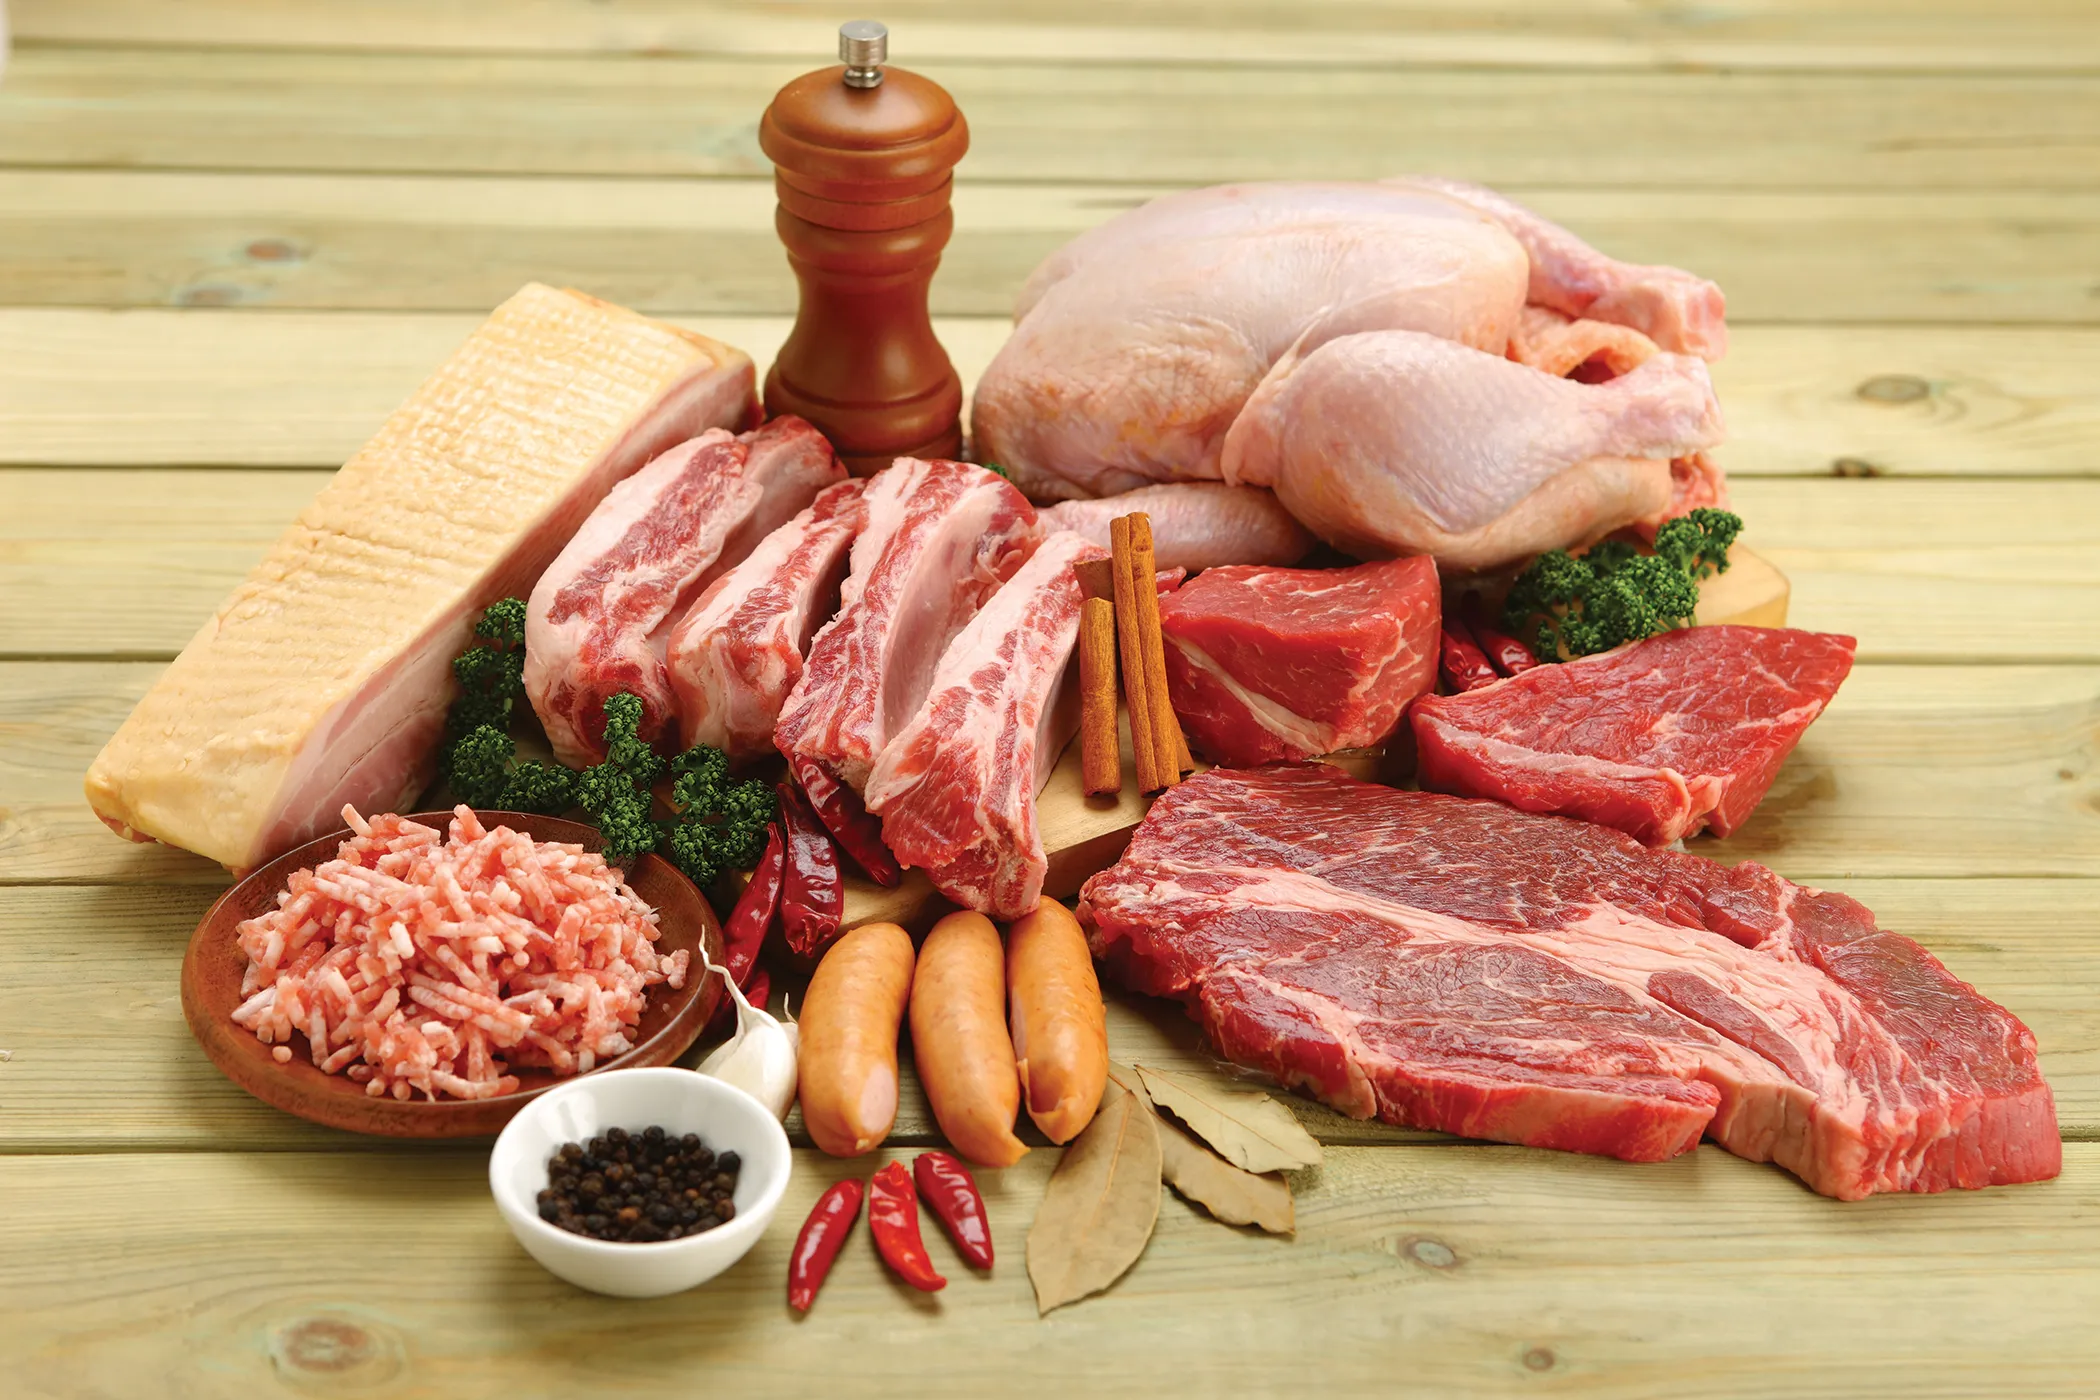 Meat shopping - counter with different types of raw meat: chicken, veal, minced meat, sausages